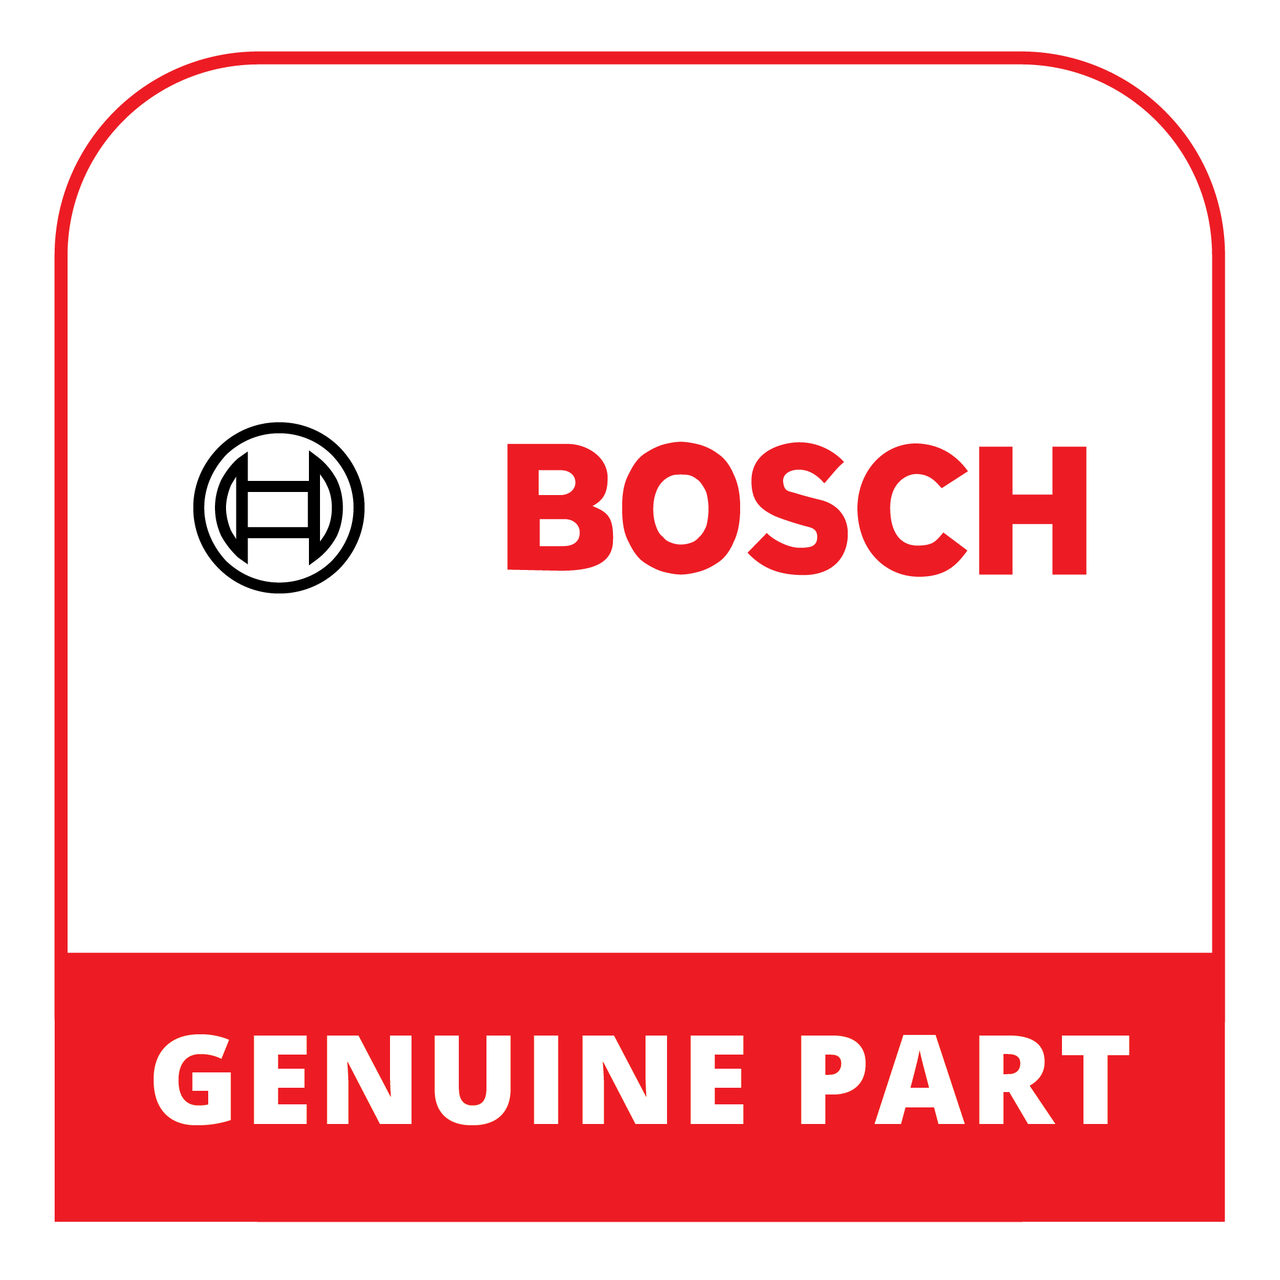 Bosch (Thermador) 12036416 - Power Module - Genuine Bosch (Thermador) Part